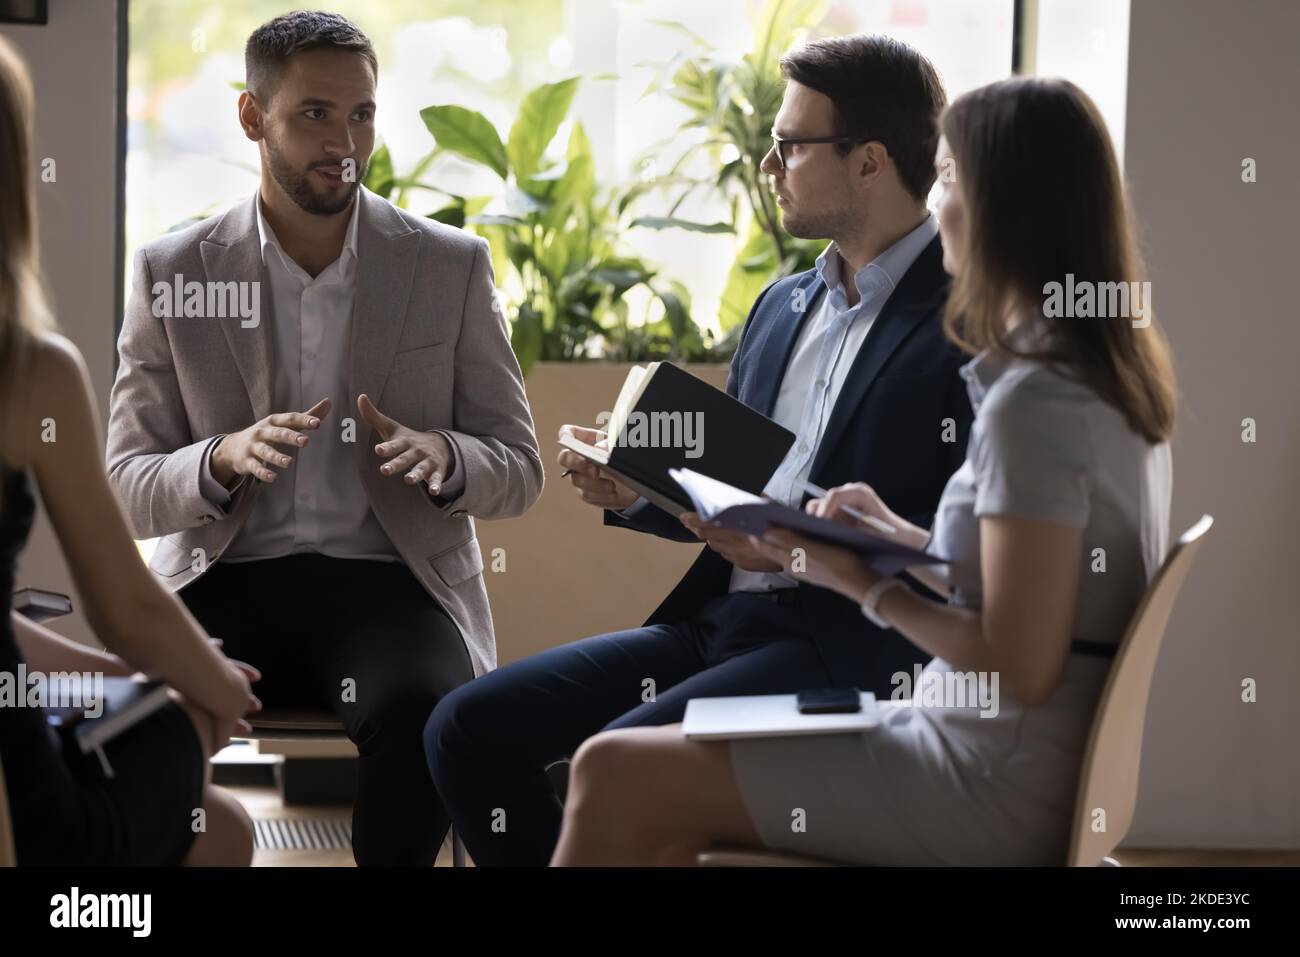 Group of businesspeople negotiating gathered in office Stock Photo